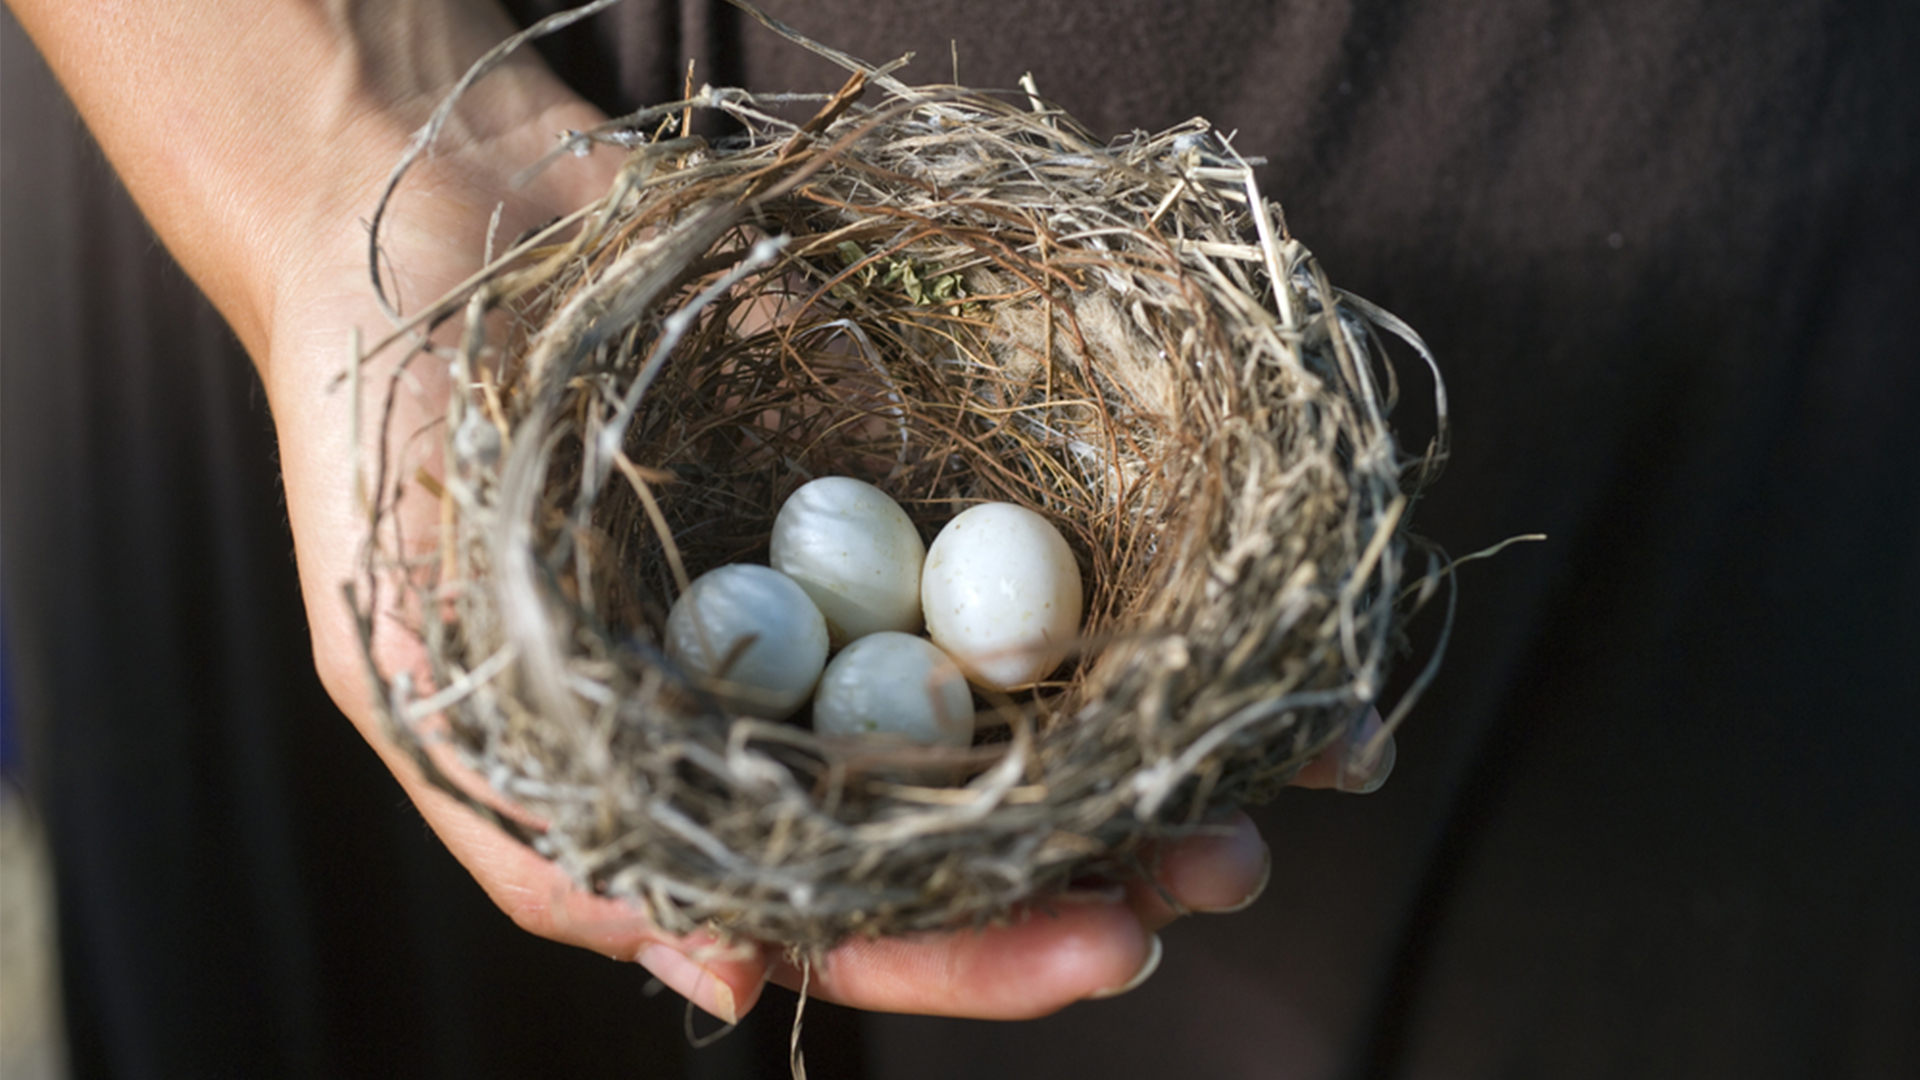 How to Remove a Birds Nest with Eggs?